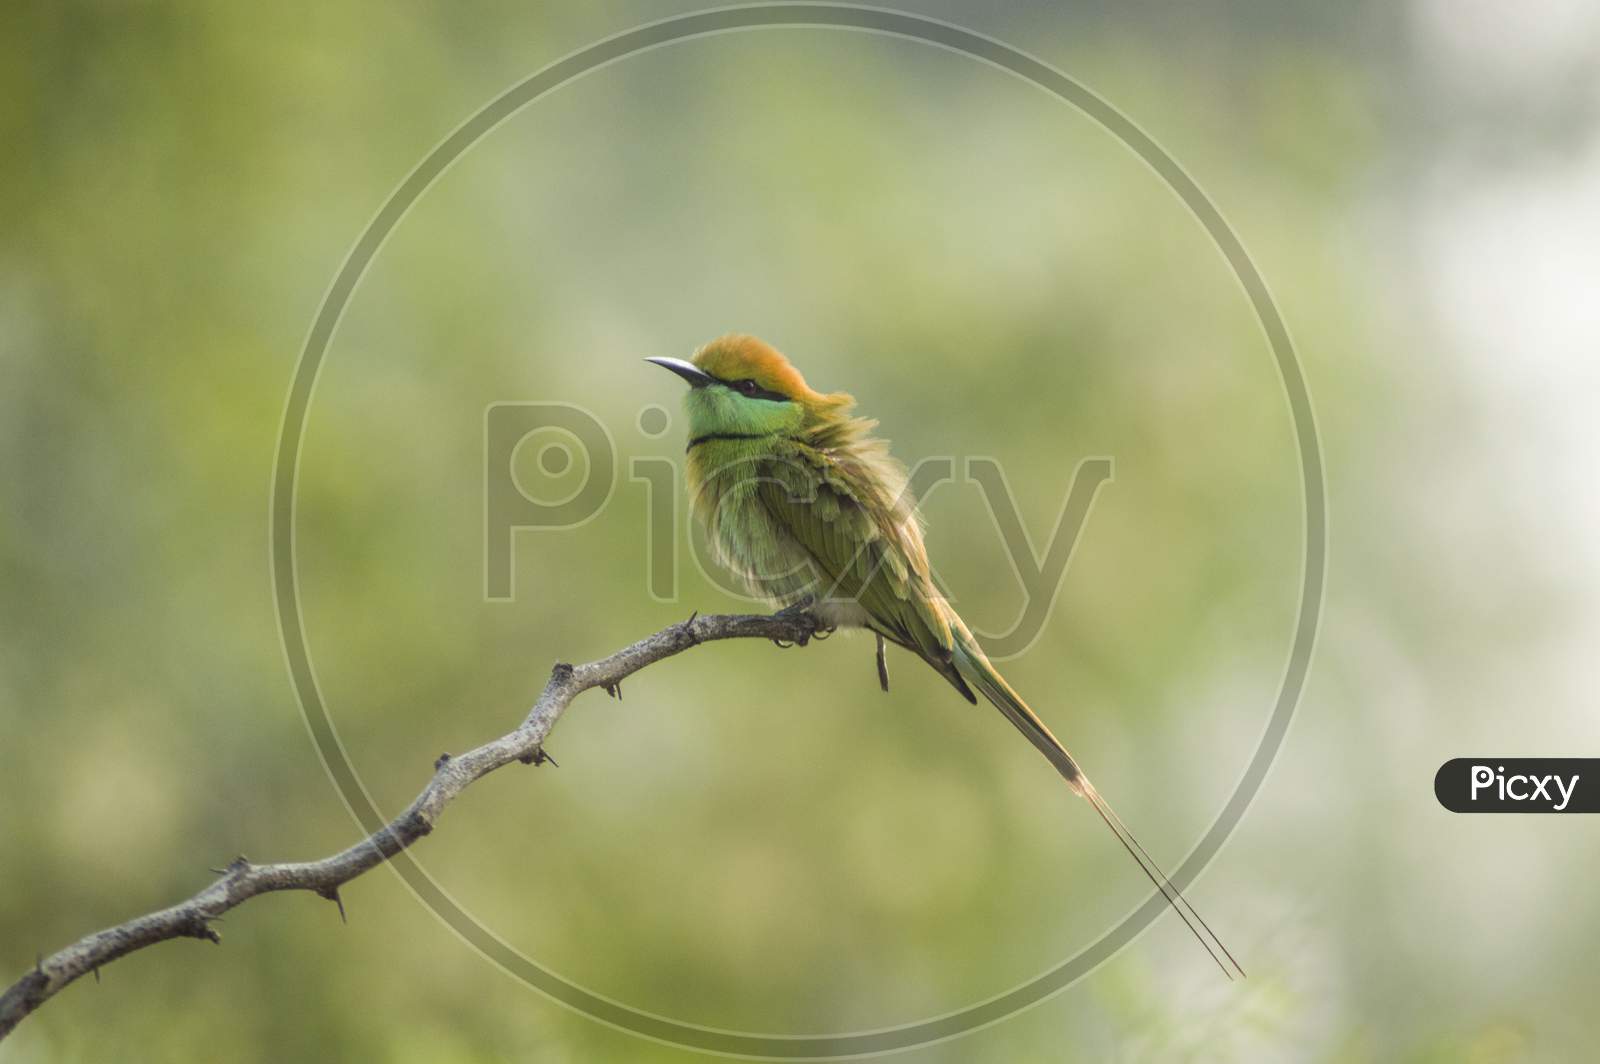 The Green bee eater..